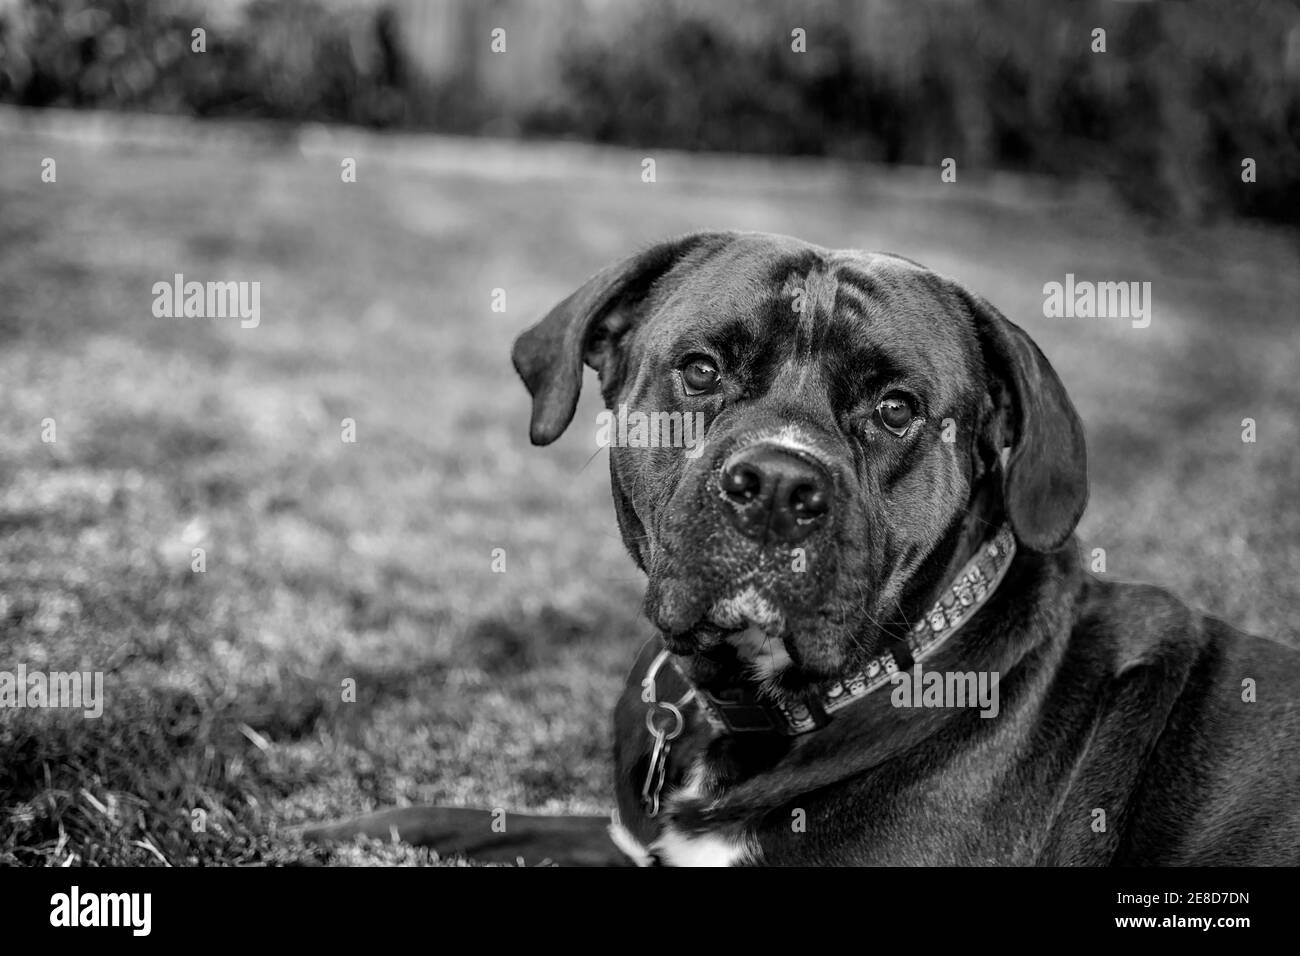 Black dog laying in the grass looking directly at the camera Stock Photo